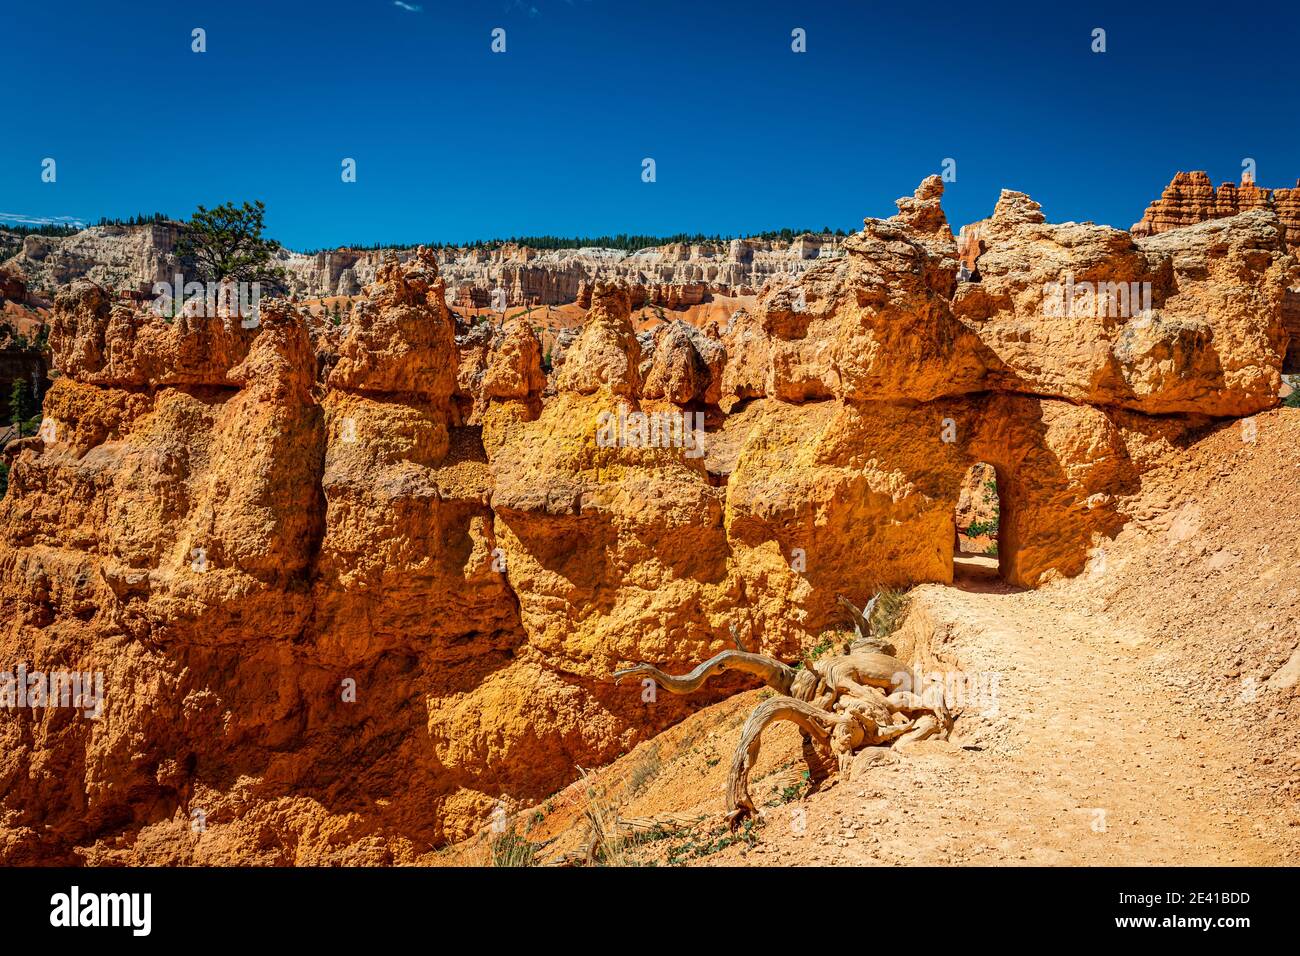 Hoodoo and eroded cliff formations at Bryce Canyon National Park in Utah. Stock Photo